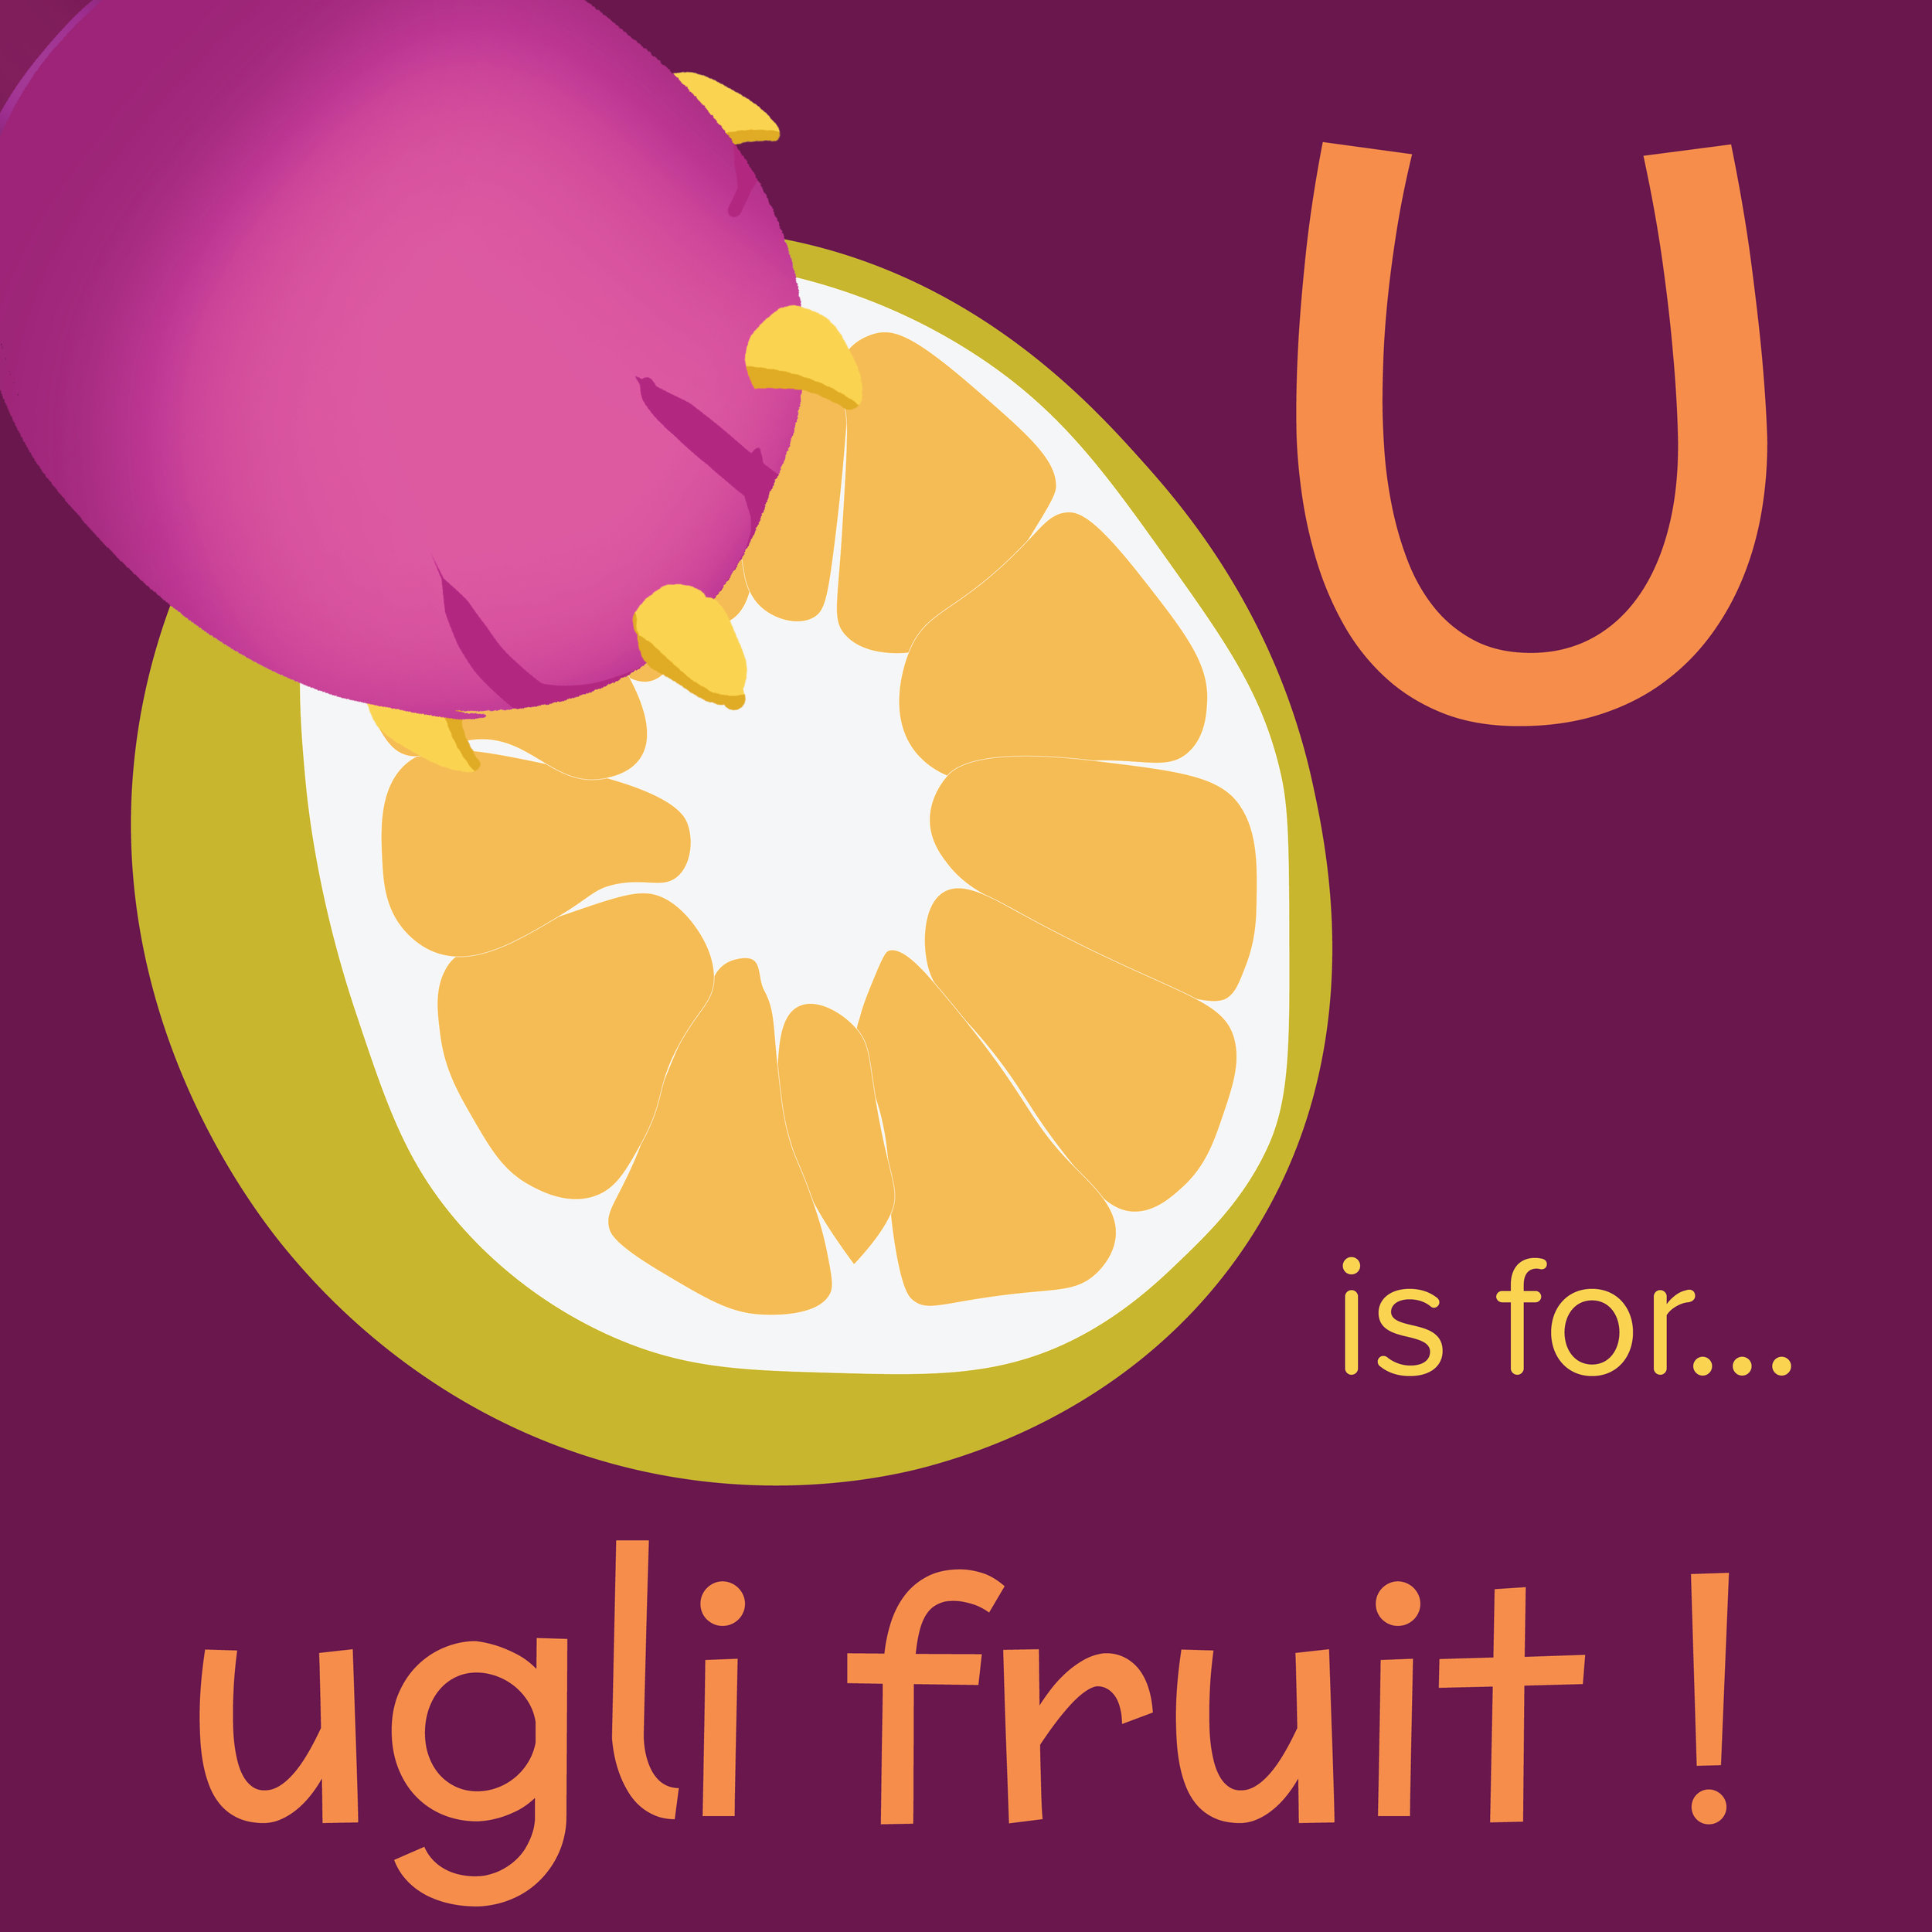 Foods that start with U, U is for ugli fruit, foods beginning with the letter u, recipes starting with u, recipes a to z